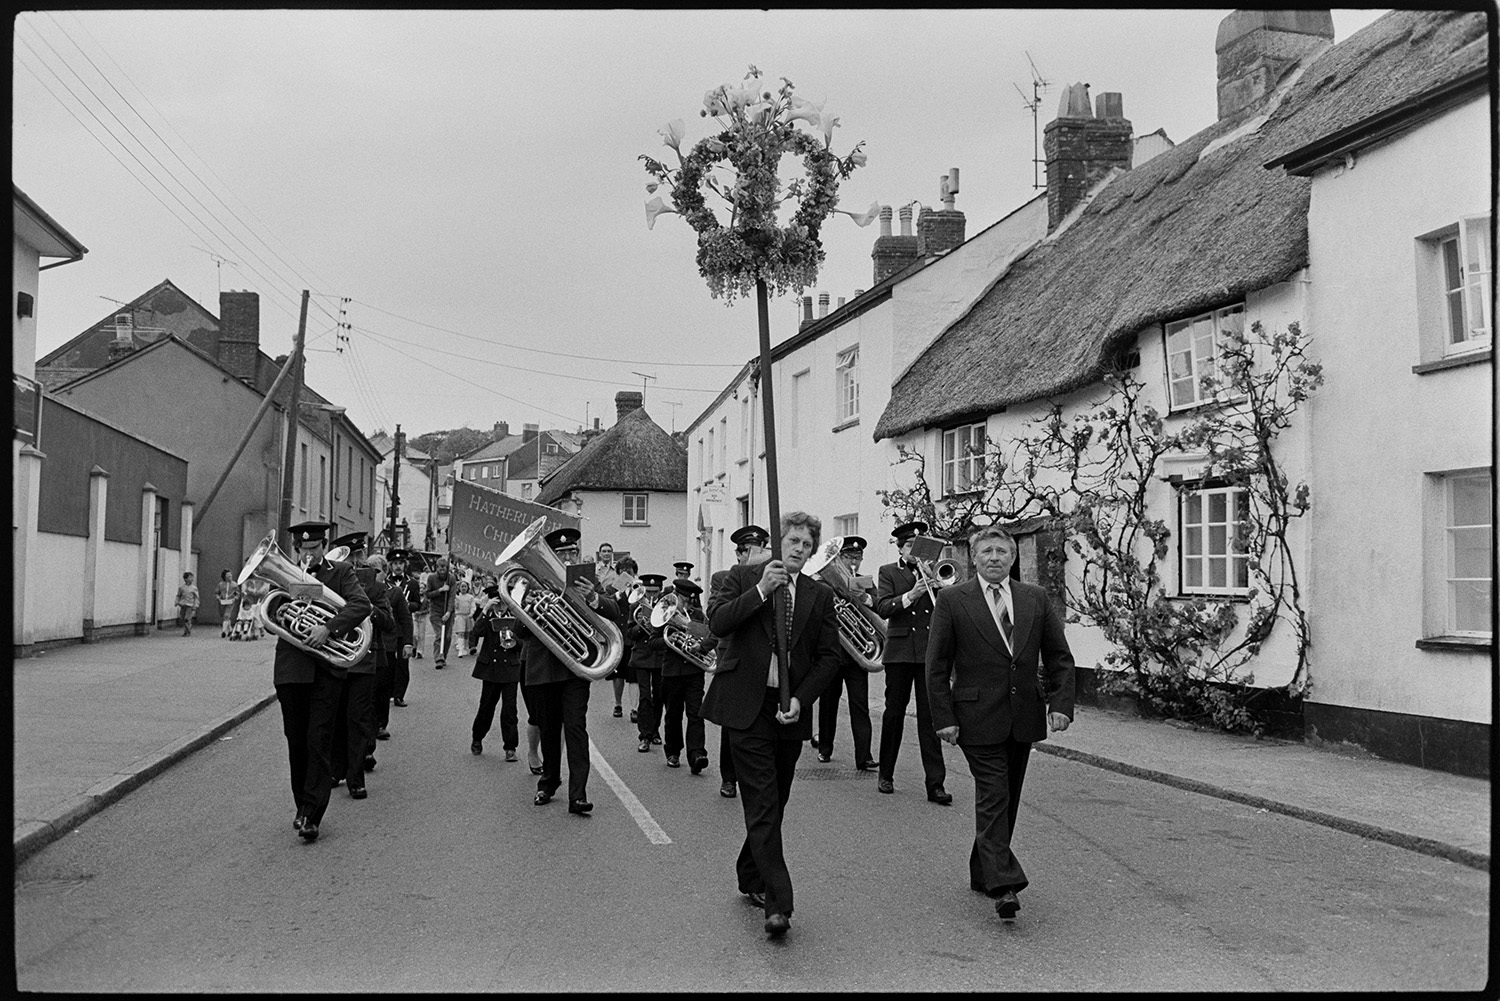 Church Sunday School Parade with banners and Silver Band marching behind garland.<br />
[The Hatherleigh Silver Band leading the Hatherleigh Church Sunday School Parade along a street in Hatherleigh, with two men in front of the band holding a floral garland. Behind the band a large banner is being carried. They are passing a thatched cottage with a rose growing up the front.]